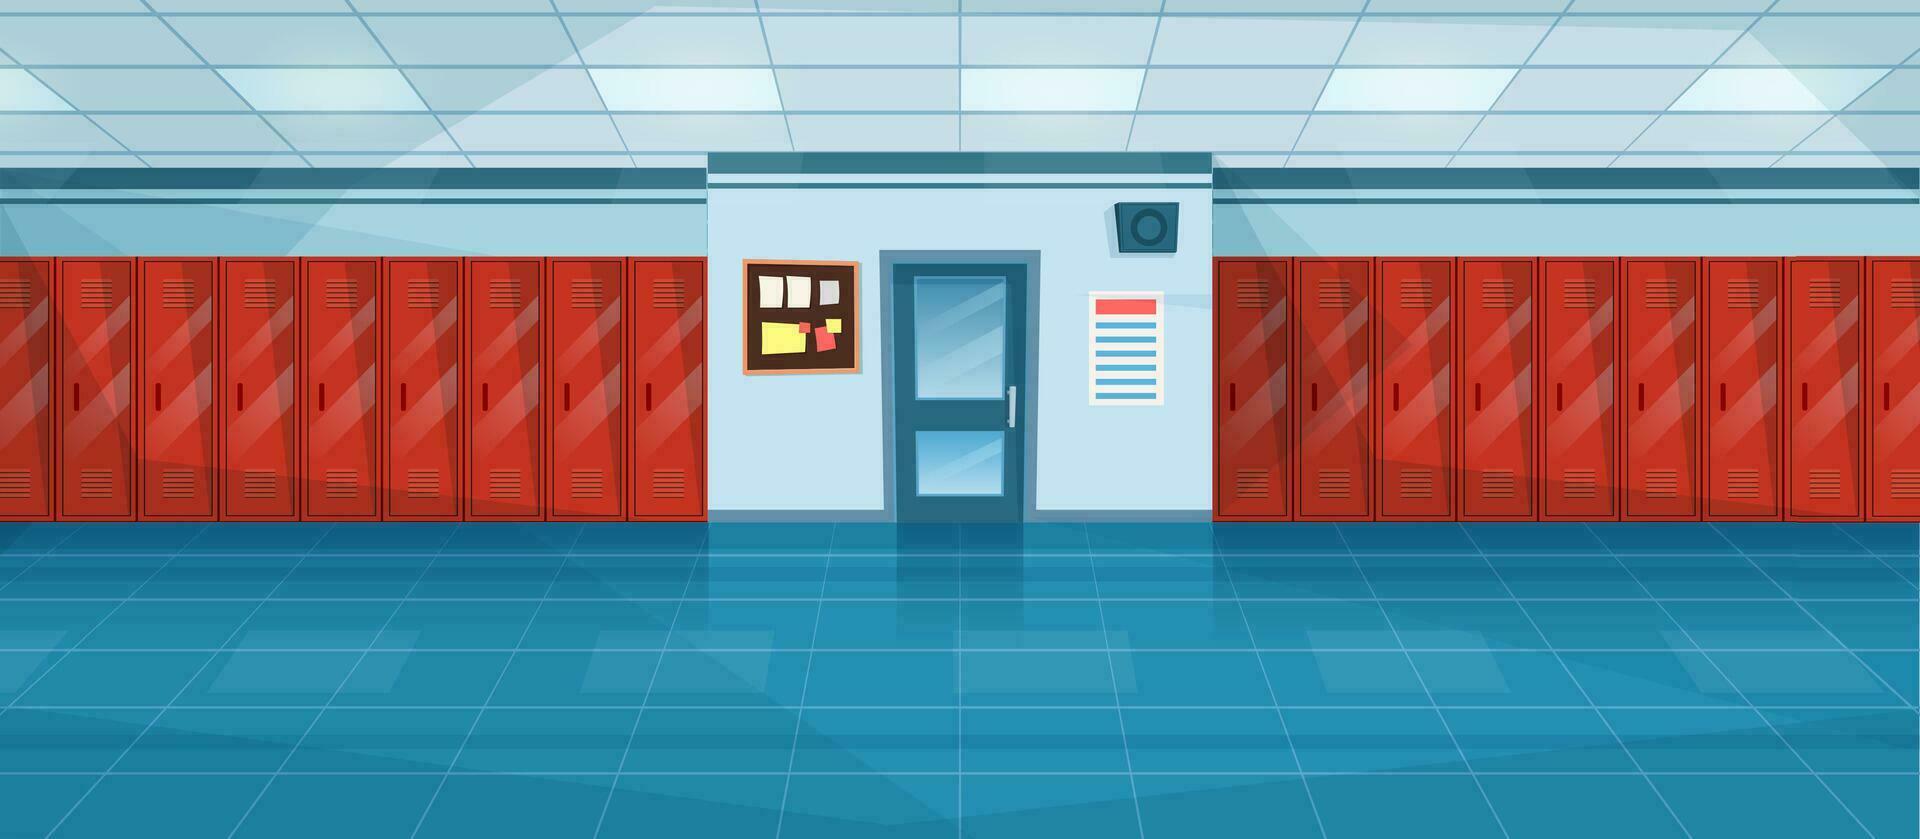 Empty School Corridor Interior With Row Of Lockers,closed door to classroom. Horizontal Banner. cartoon College campus hall or university lobby. Vector illustration in a flat style